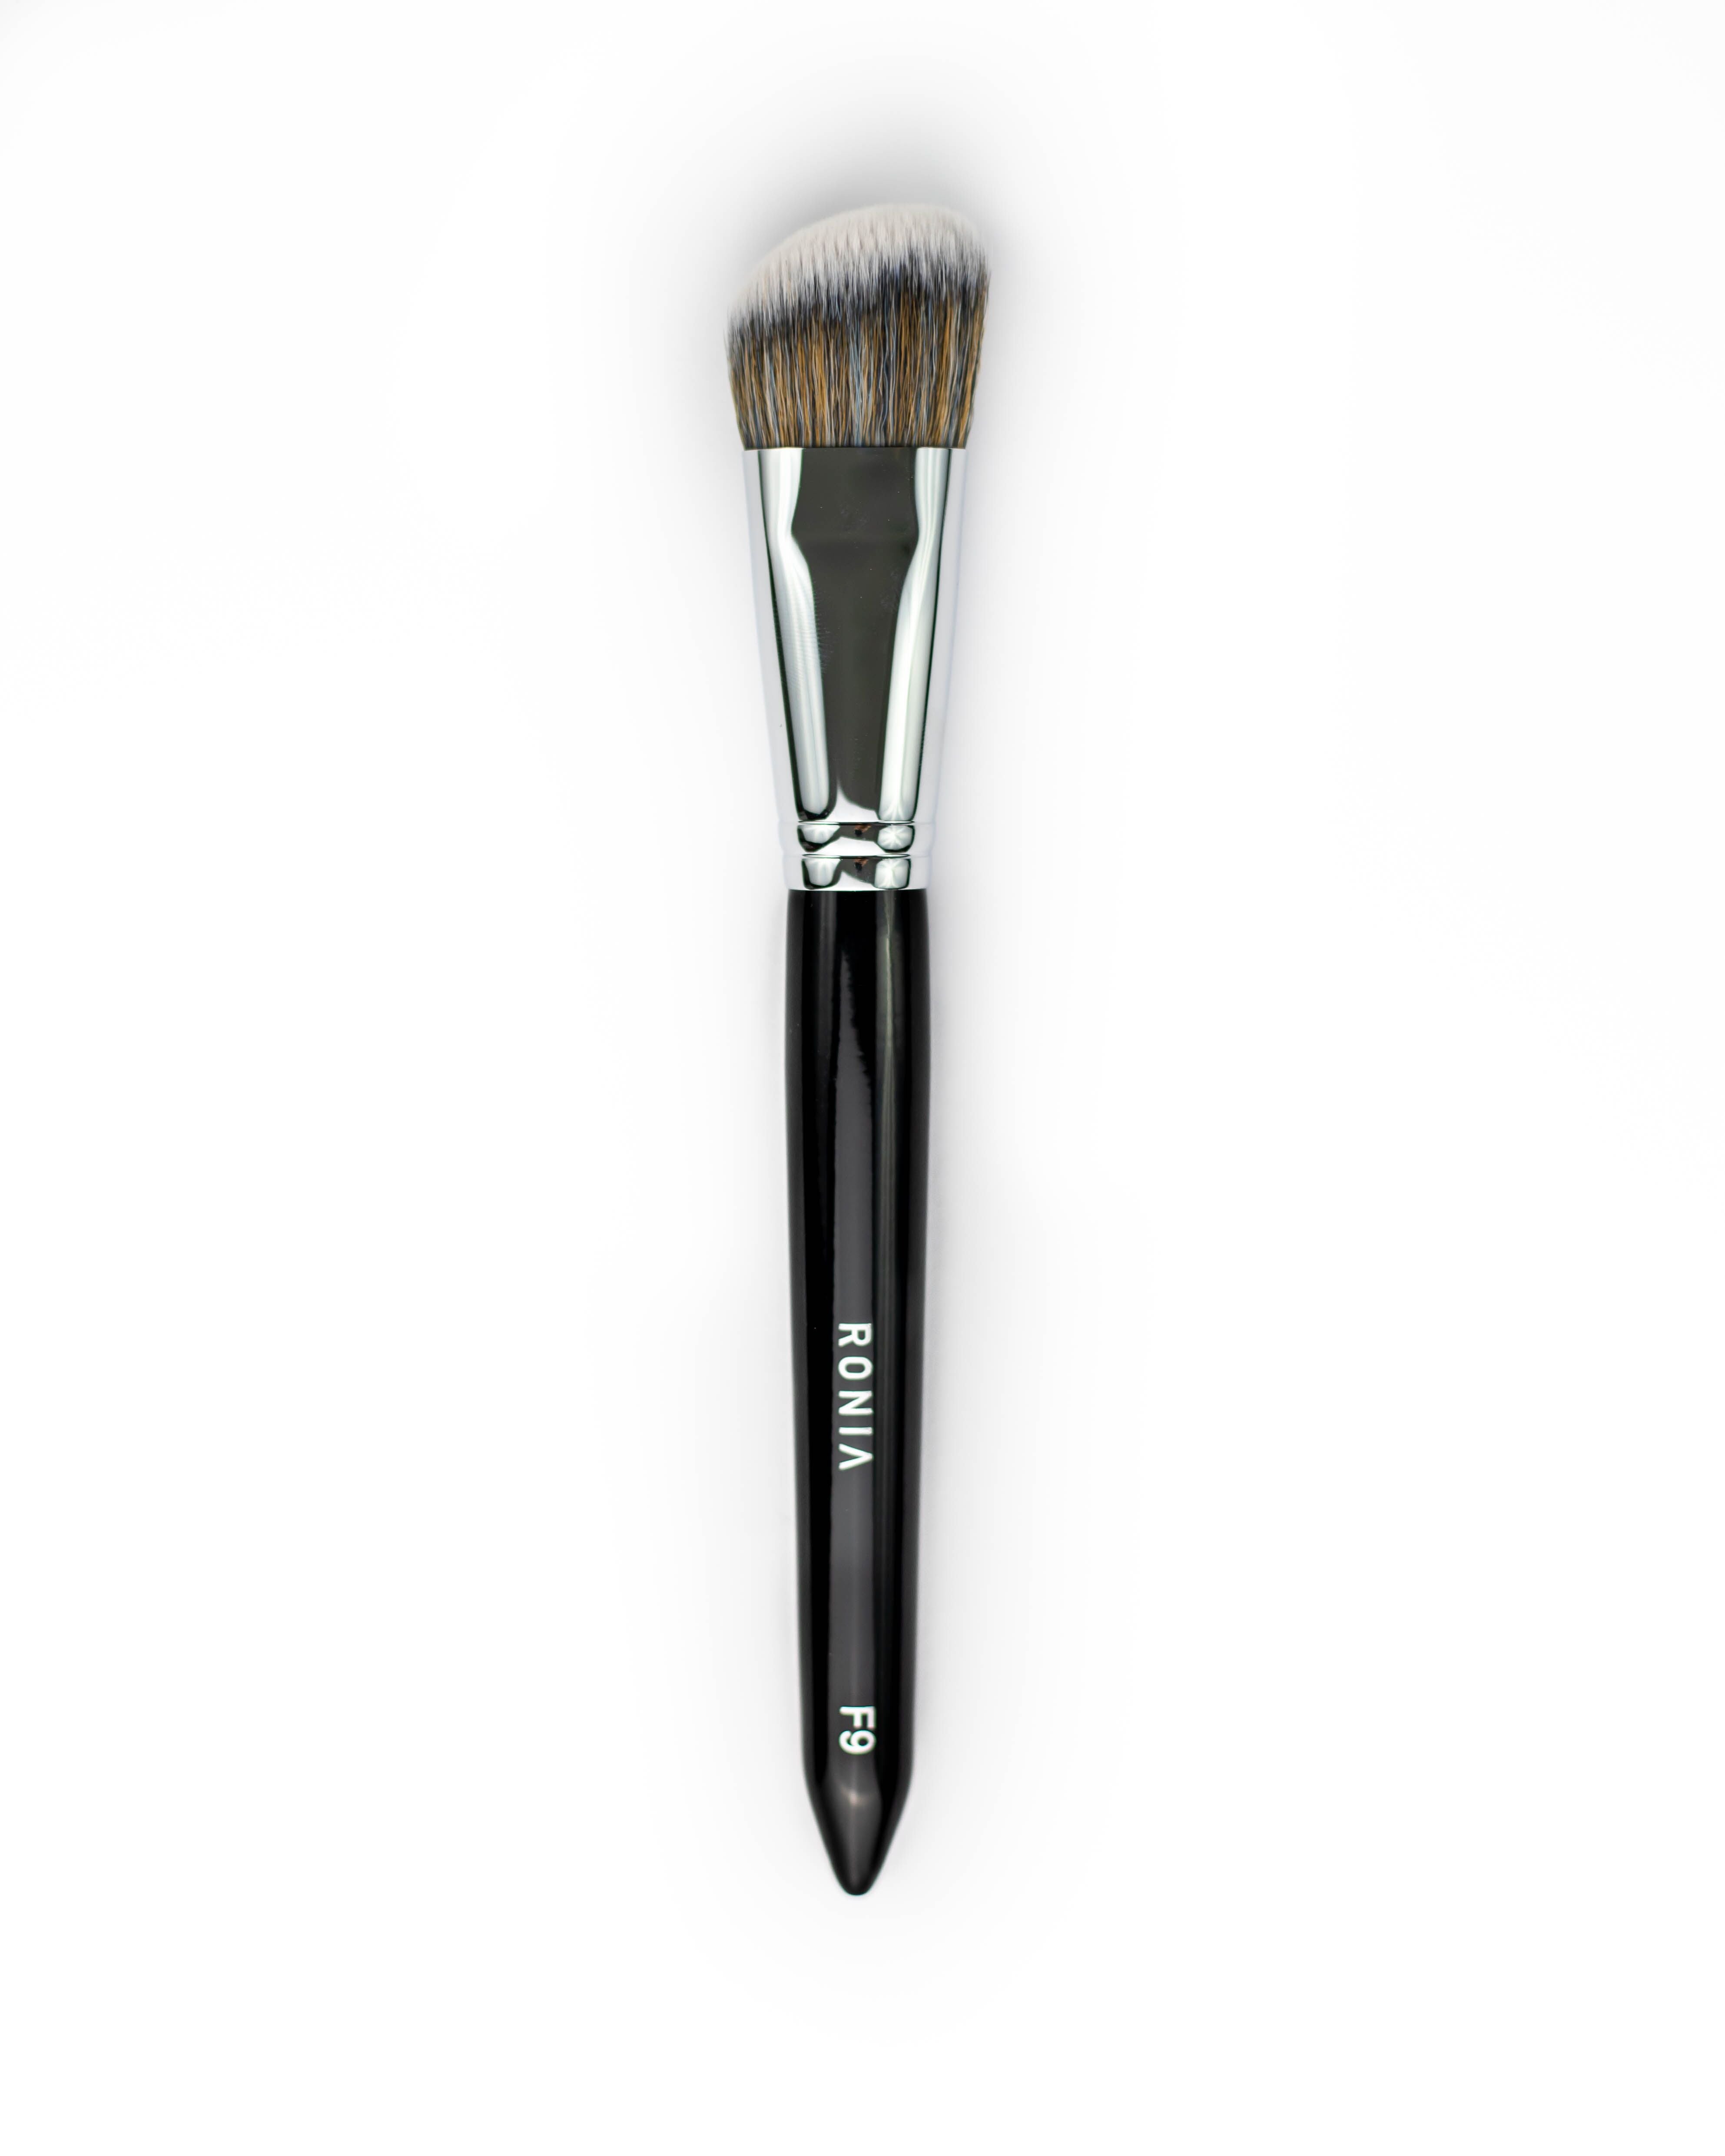 TOP 5 BEST FOUNDATION BRUSHES